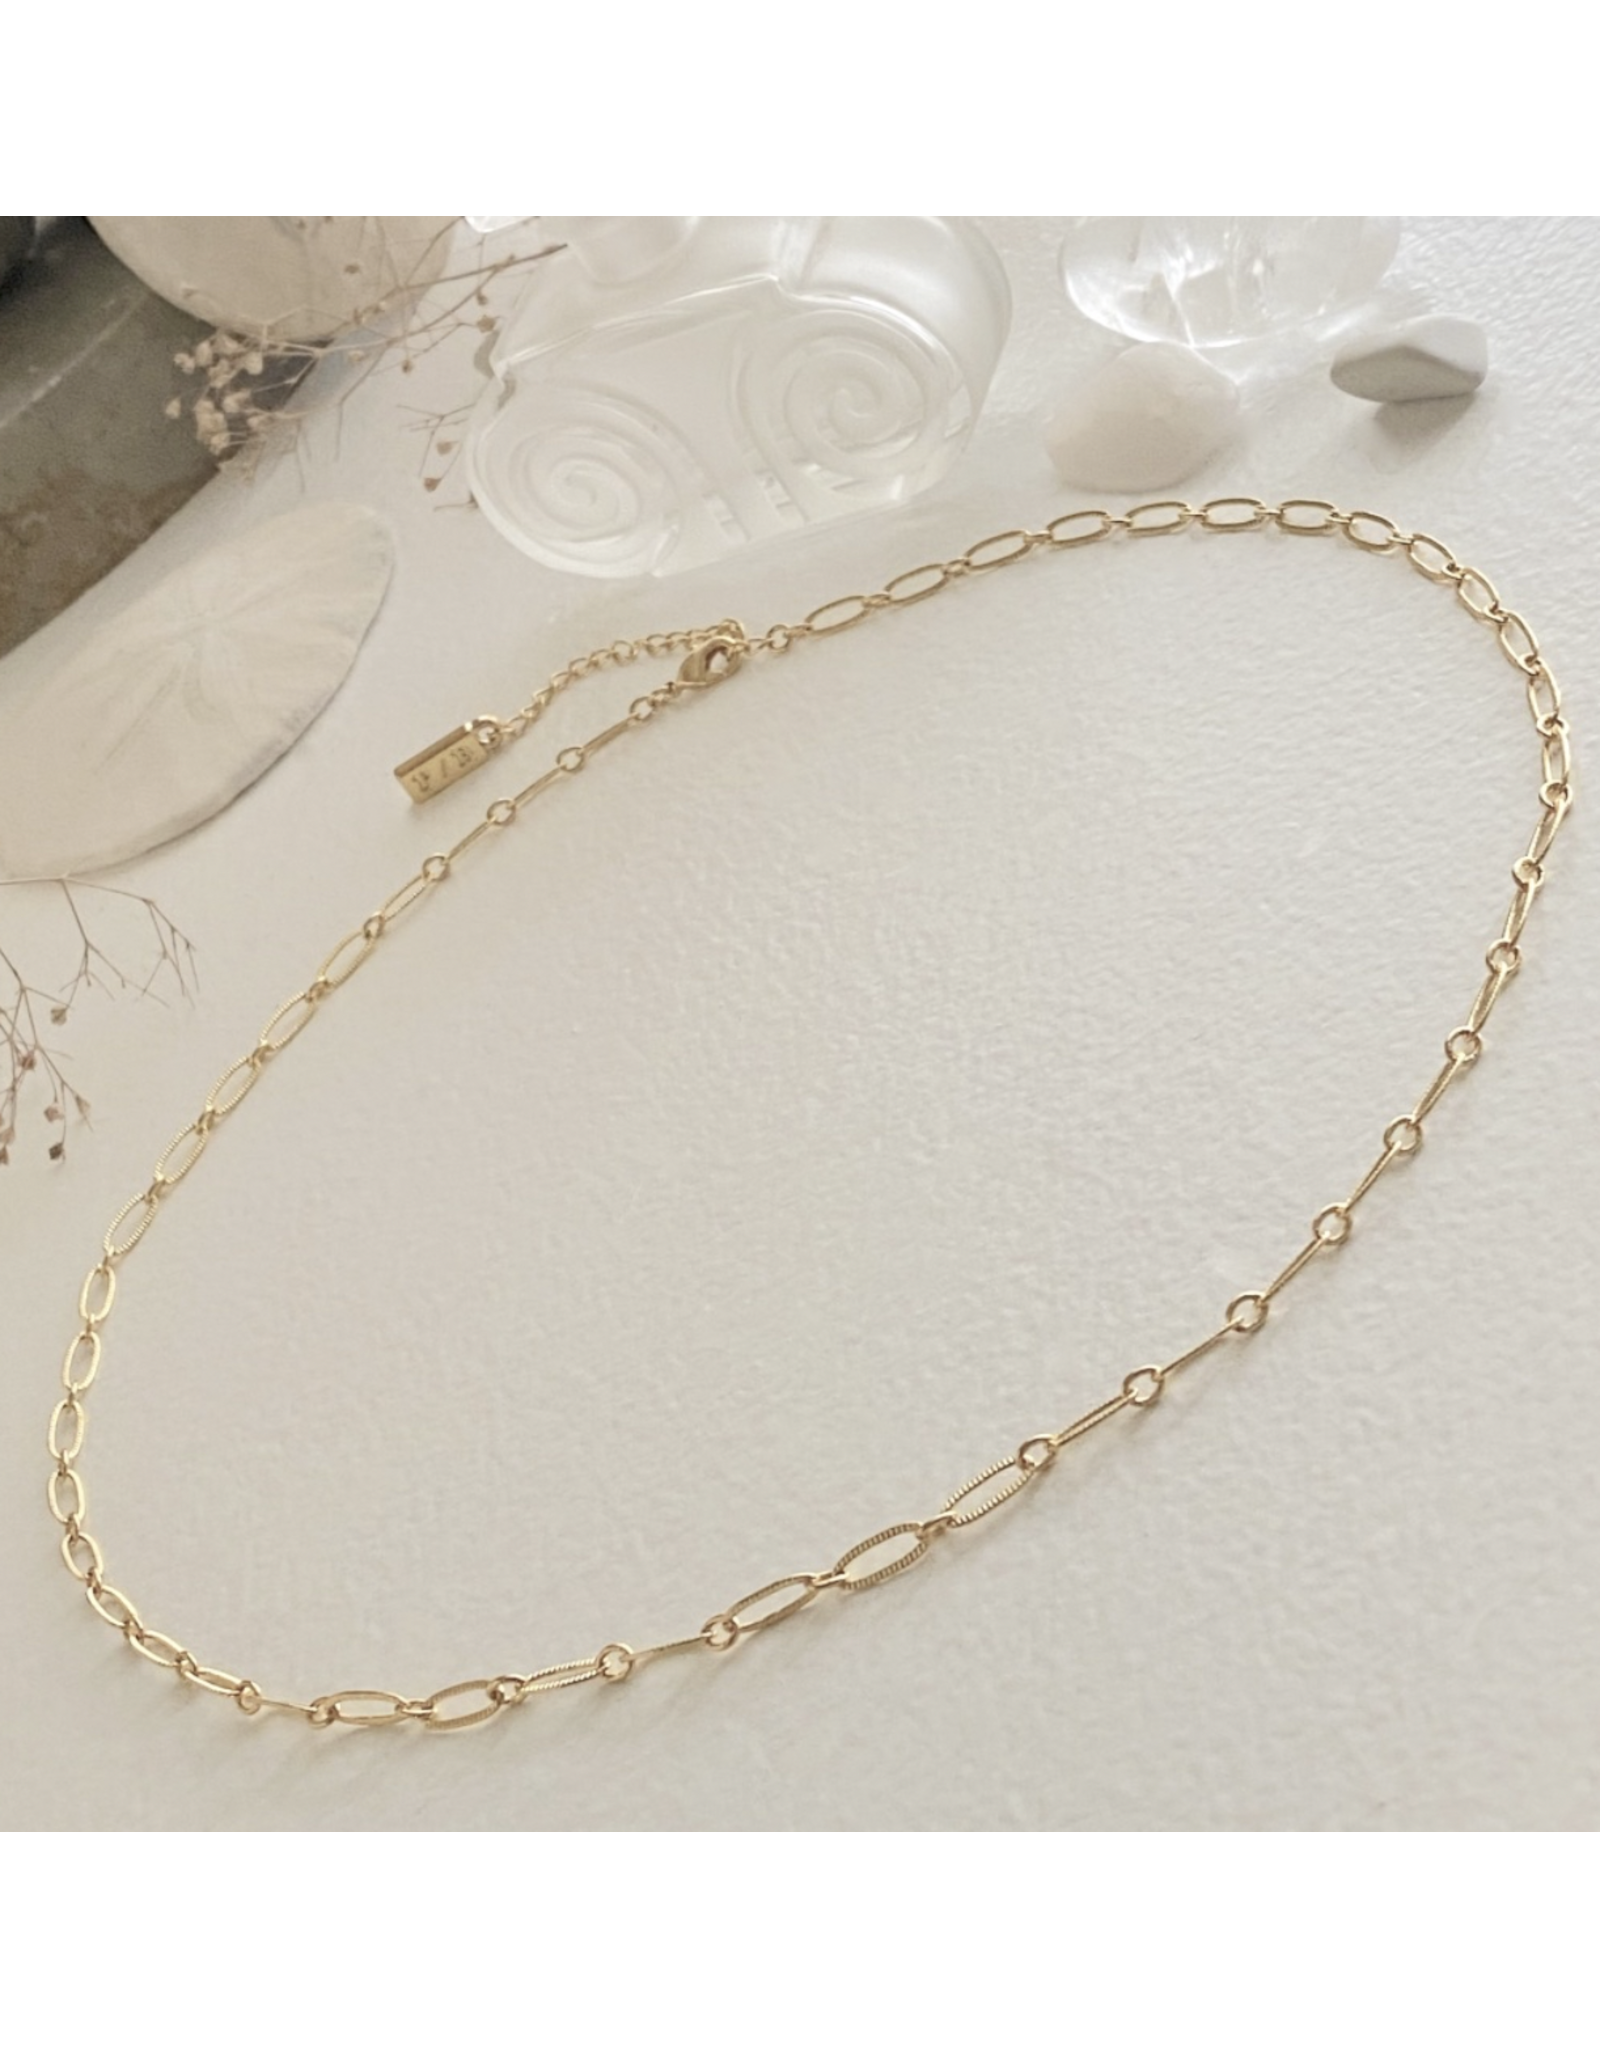 Pika & Bear Pika & Bear- Donostia Textured Paperclip Chain Necklace - Gold - 17" Length plus 2" Extension Chain